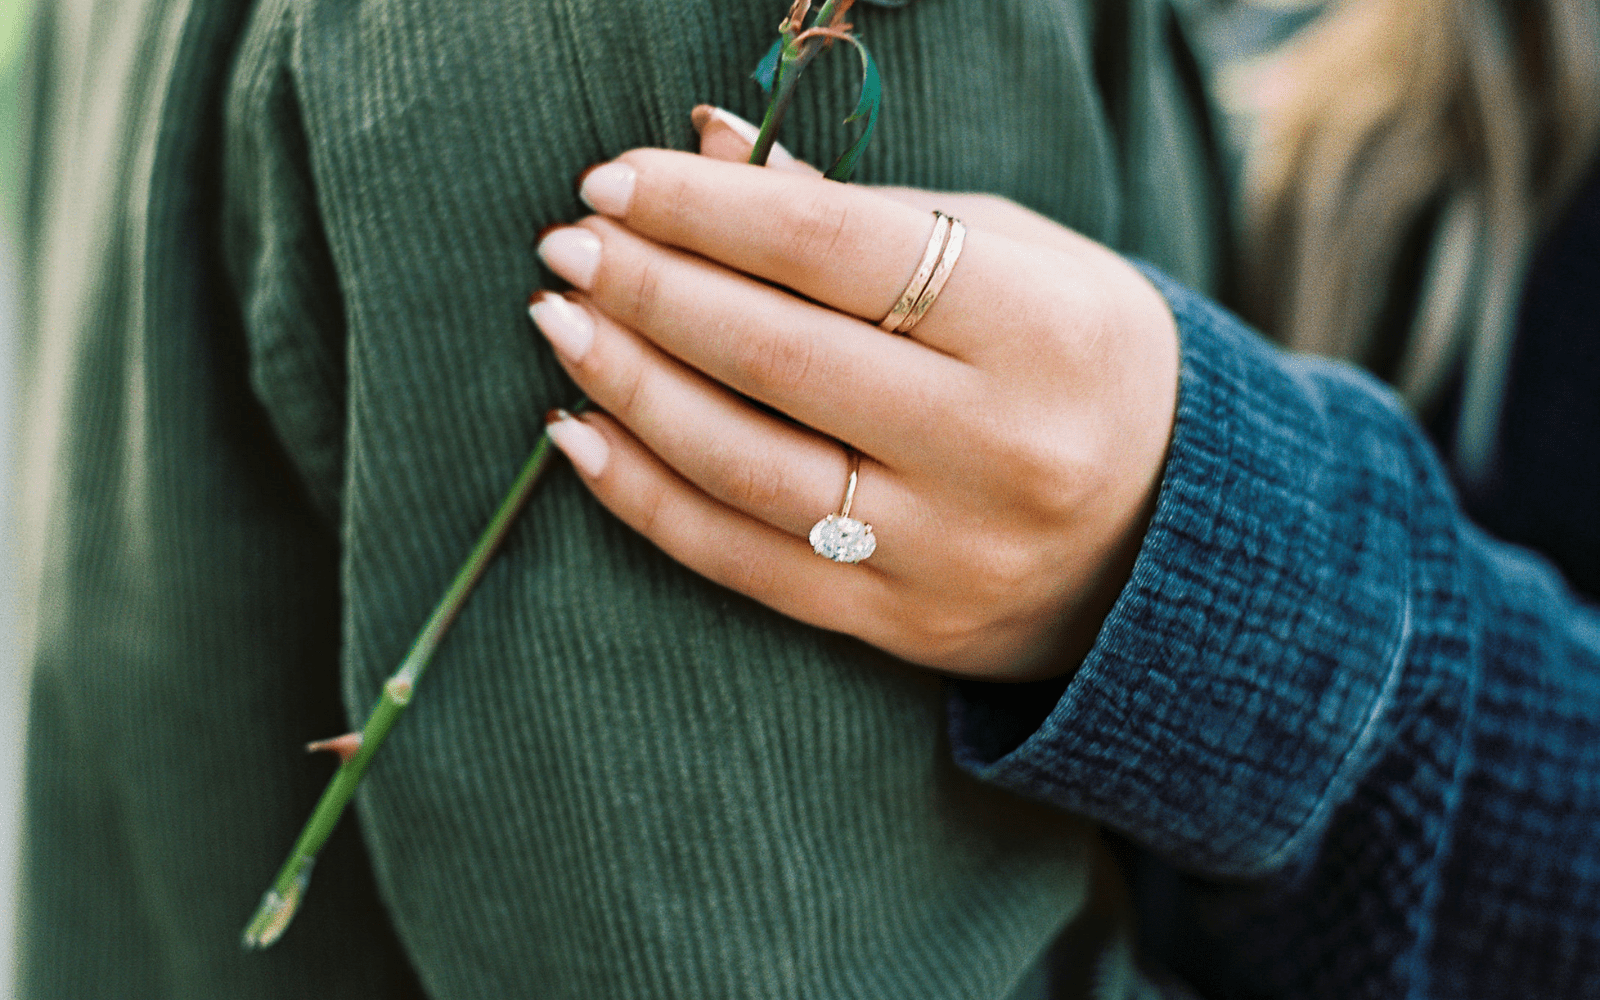 How to Buy an Engagement Ring in 5 Easy Steps